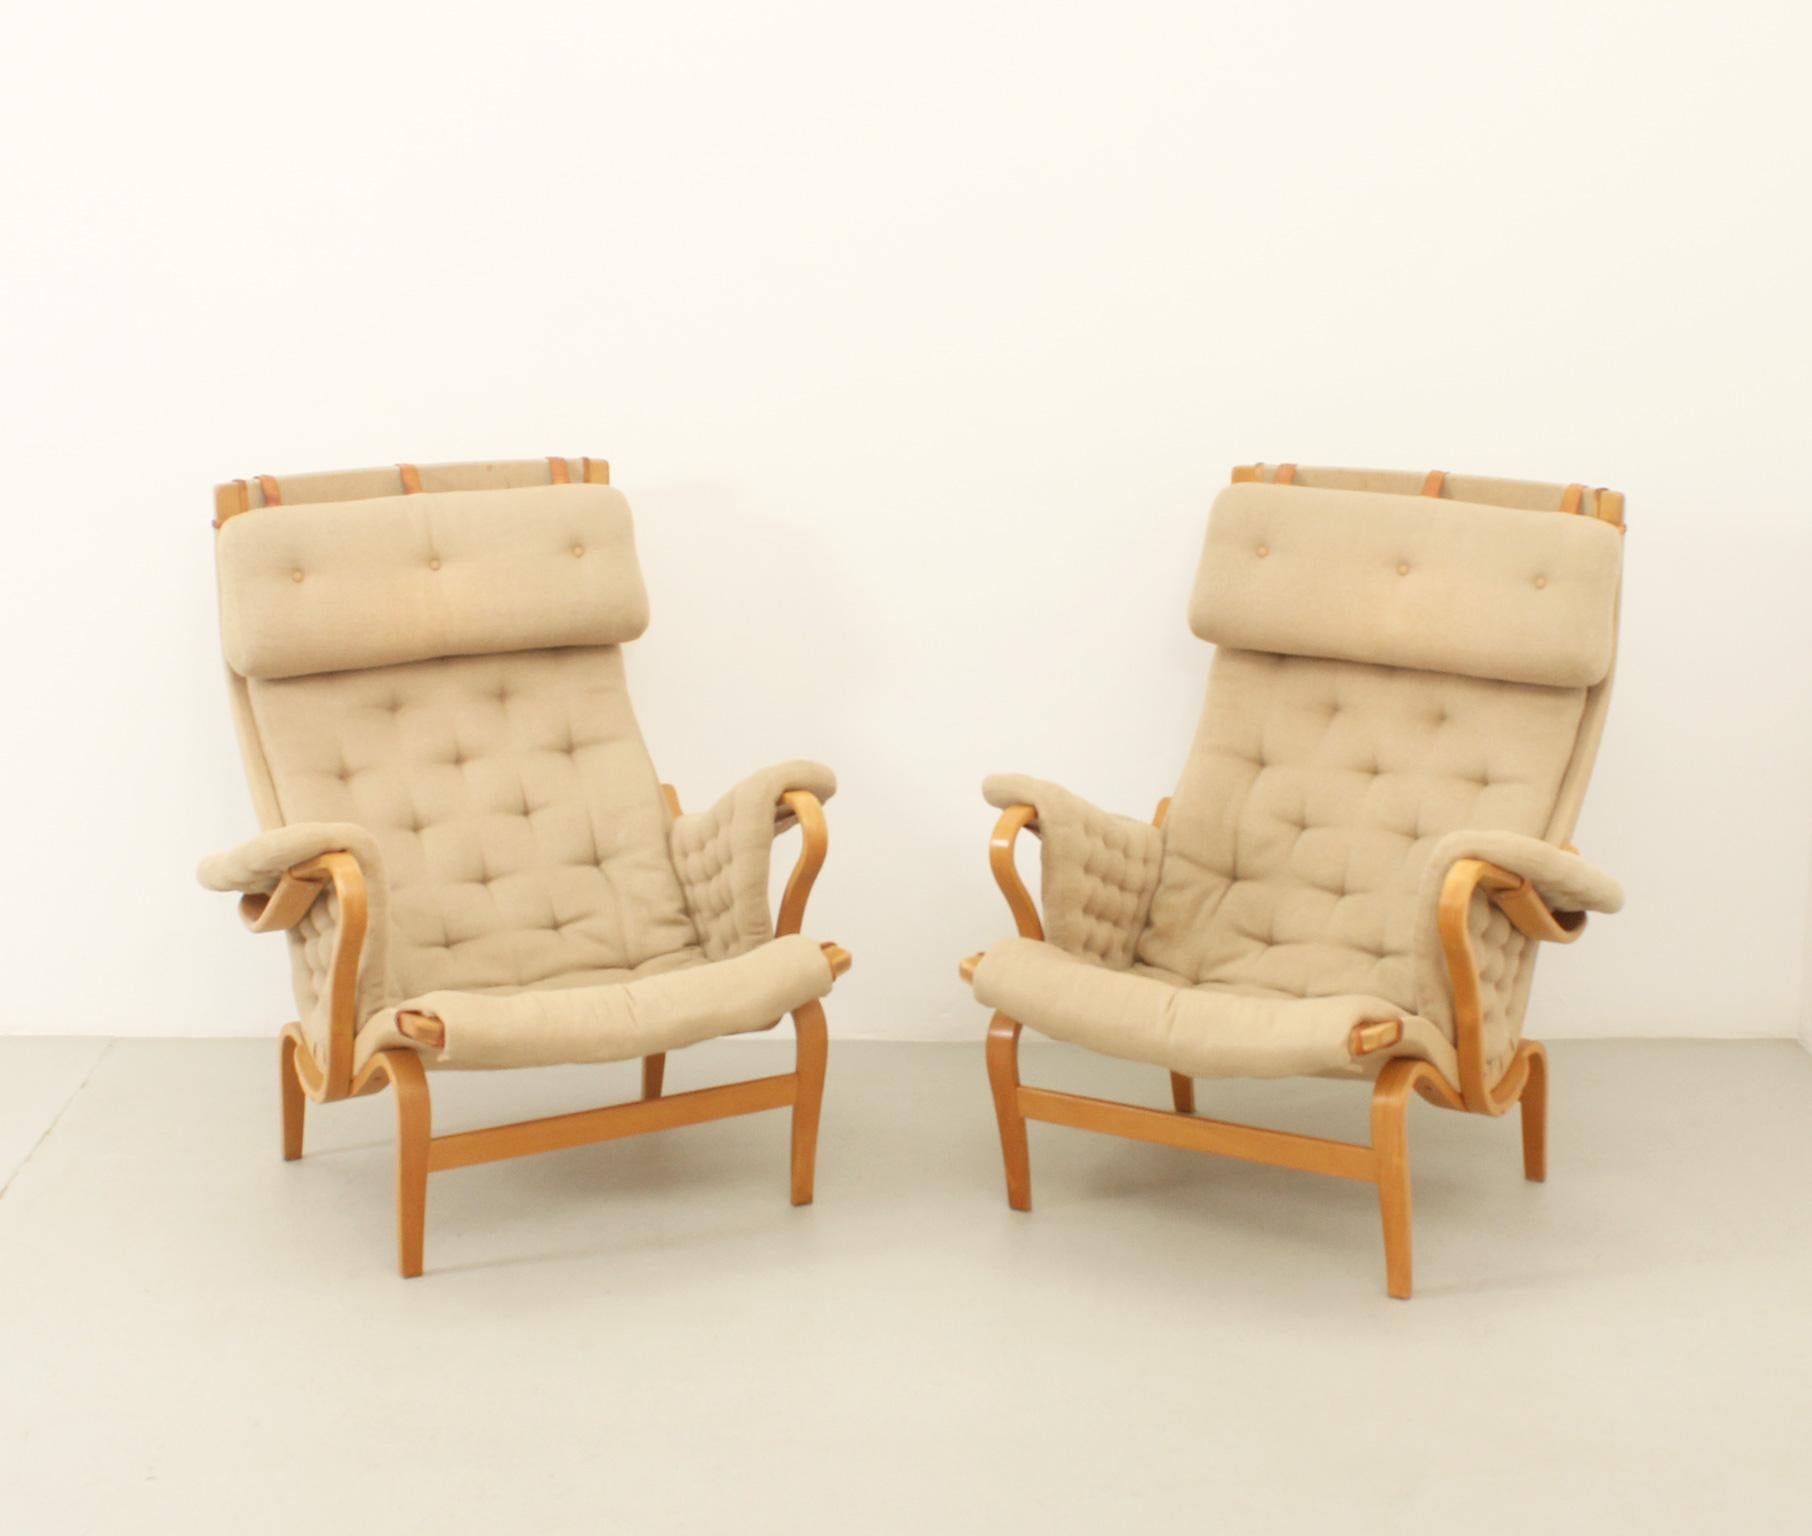 Swedish Pair of Pernilla Armchairs by Bruno Mathsson for Dux, 1969